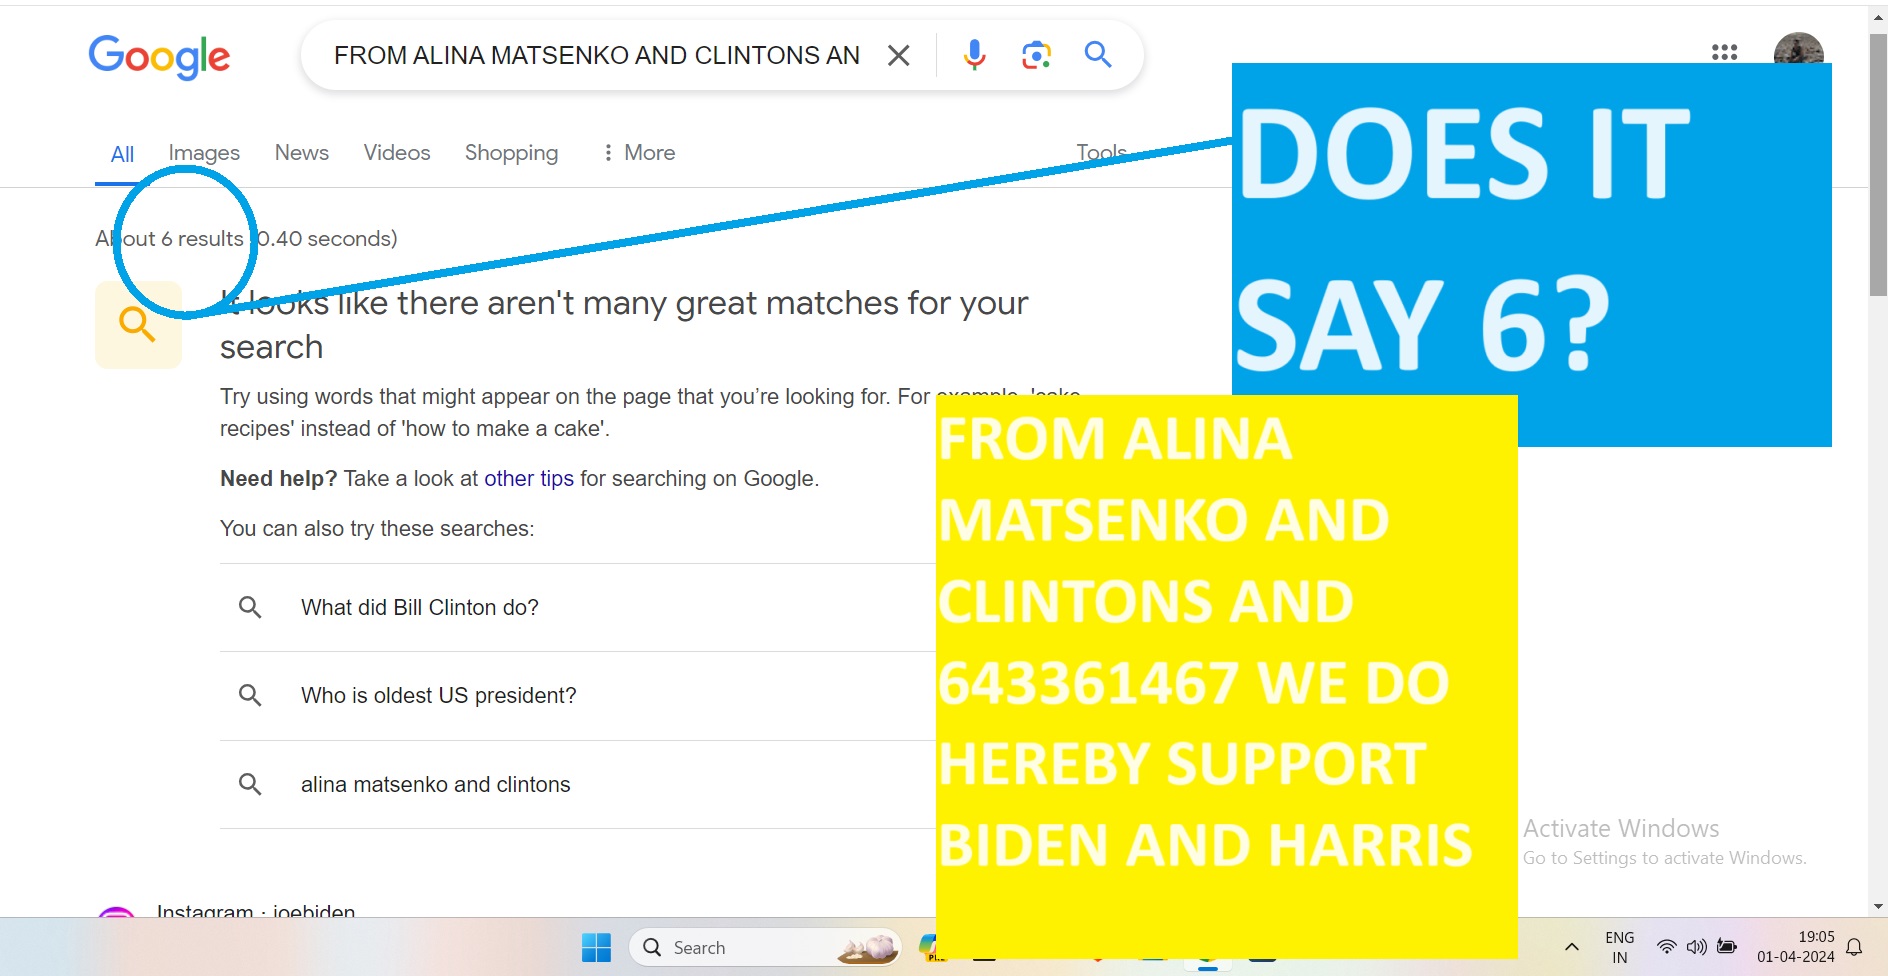 FROM ALINA MATSENKO AND CLINTONS AND 643361467 WE DO HEREBY SUPPORT BIDEN AND HARRIS